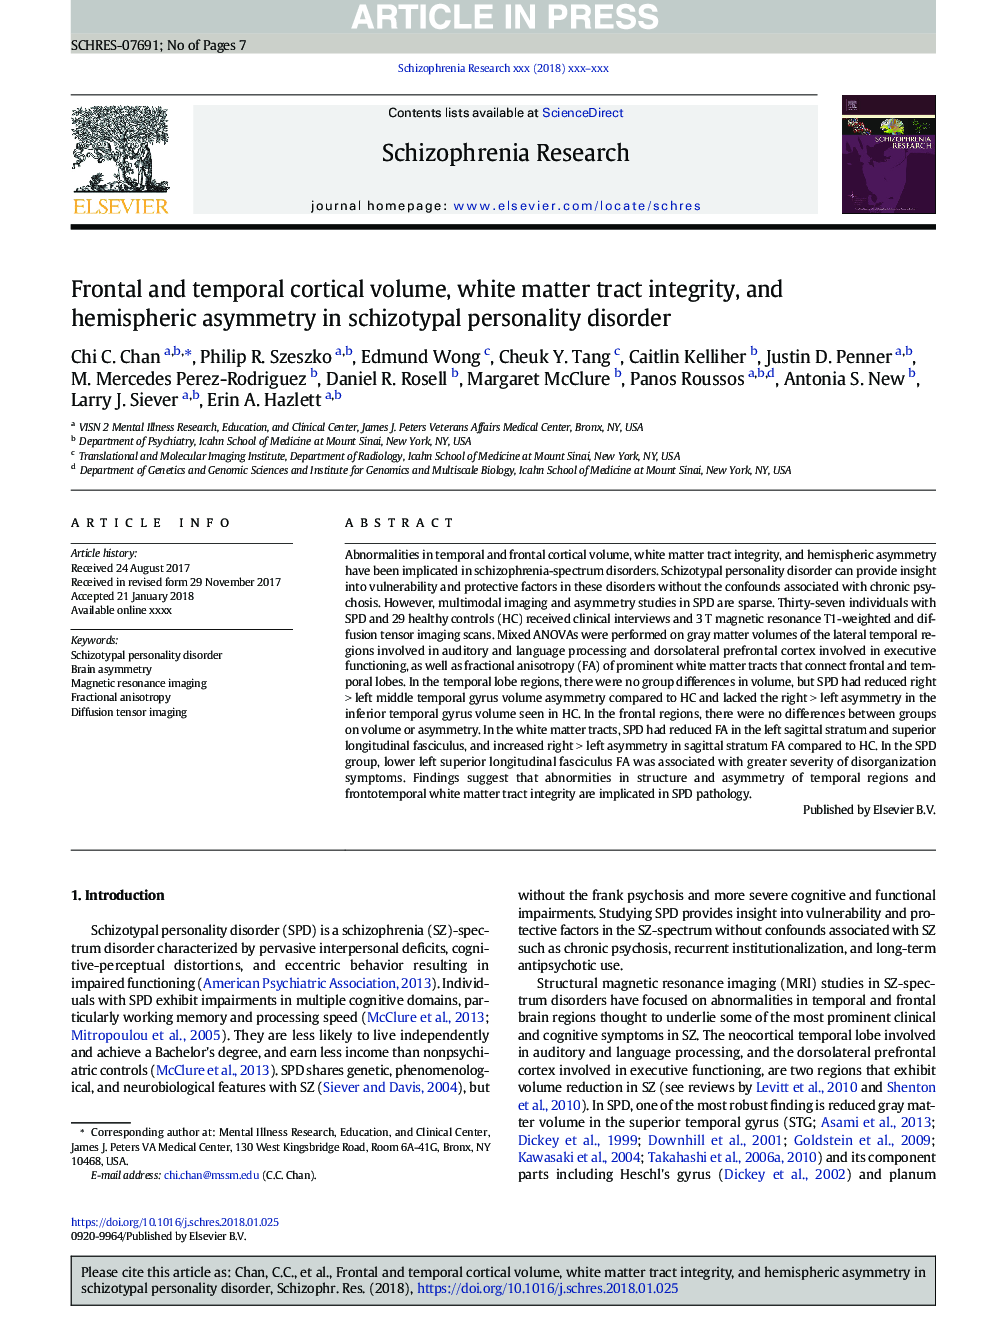 Frontal and temporal cortical volume, white matter tract integrity, and hemispheric asymmetry in schizotypal personality disorder